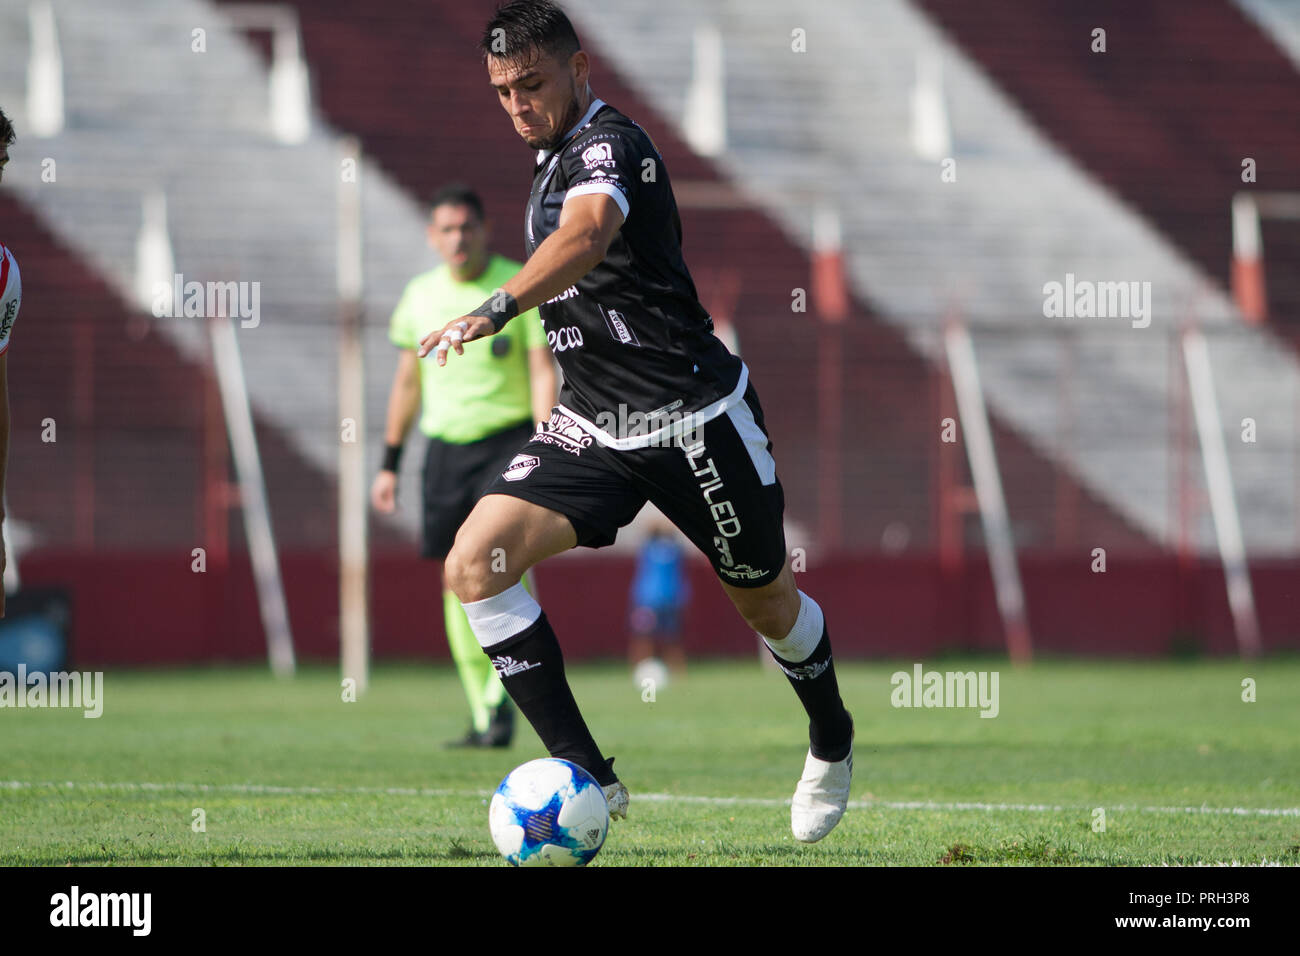 The football player, Gastón García, stands with the ball during a football match of the argentinian league in Buenos Aires, 22 of april of 2018 Stock Photo